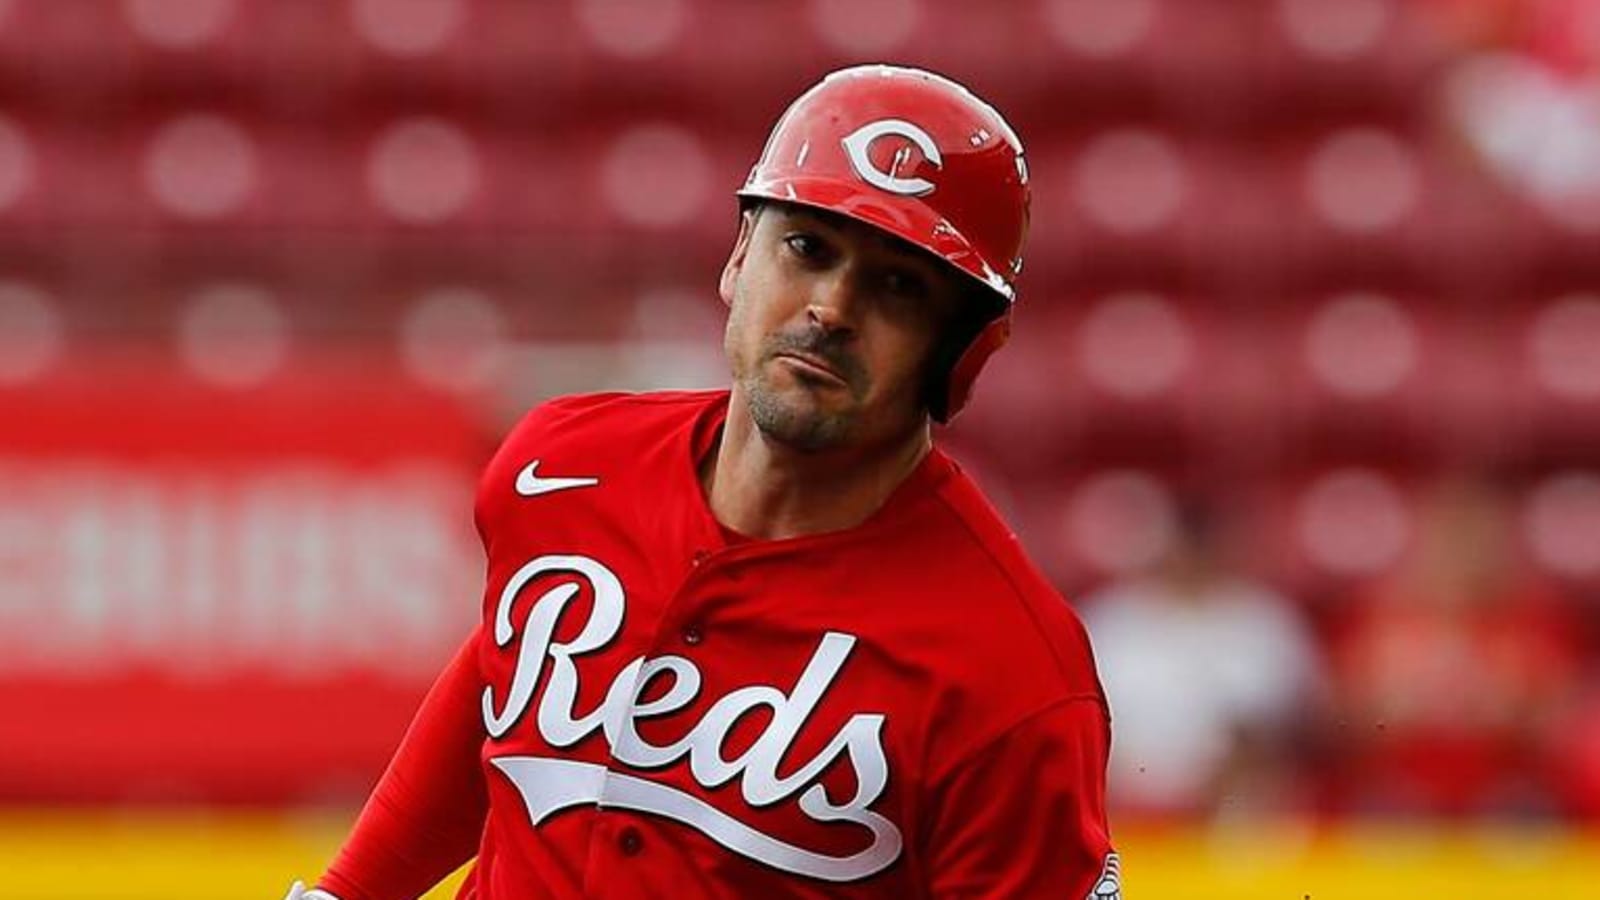 Reds score 20 runs in win over Cubs, most since 1999